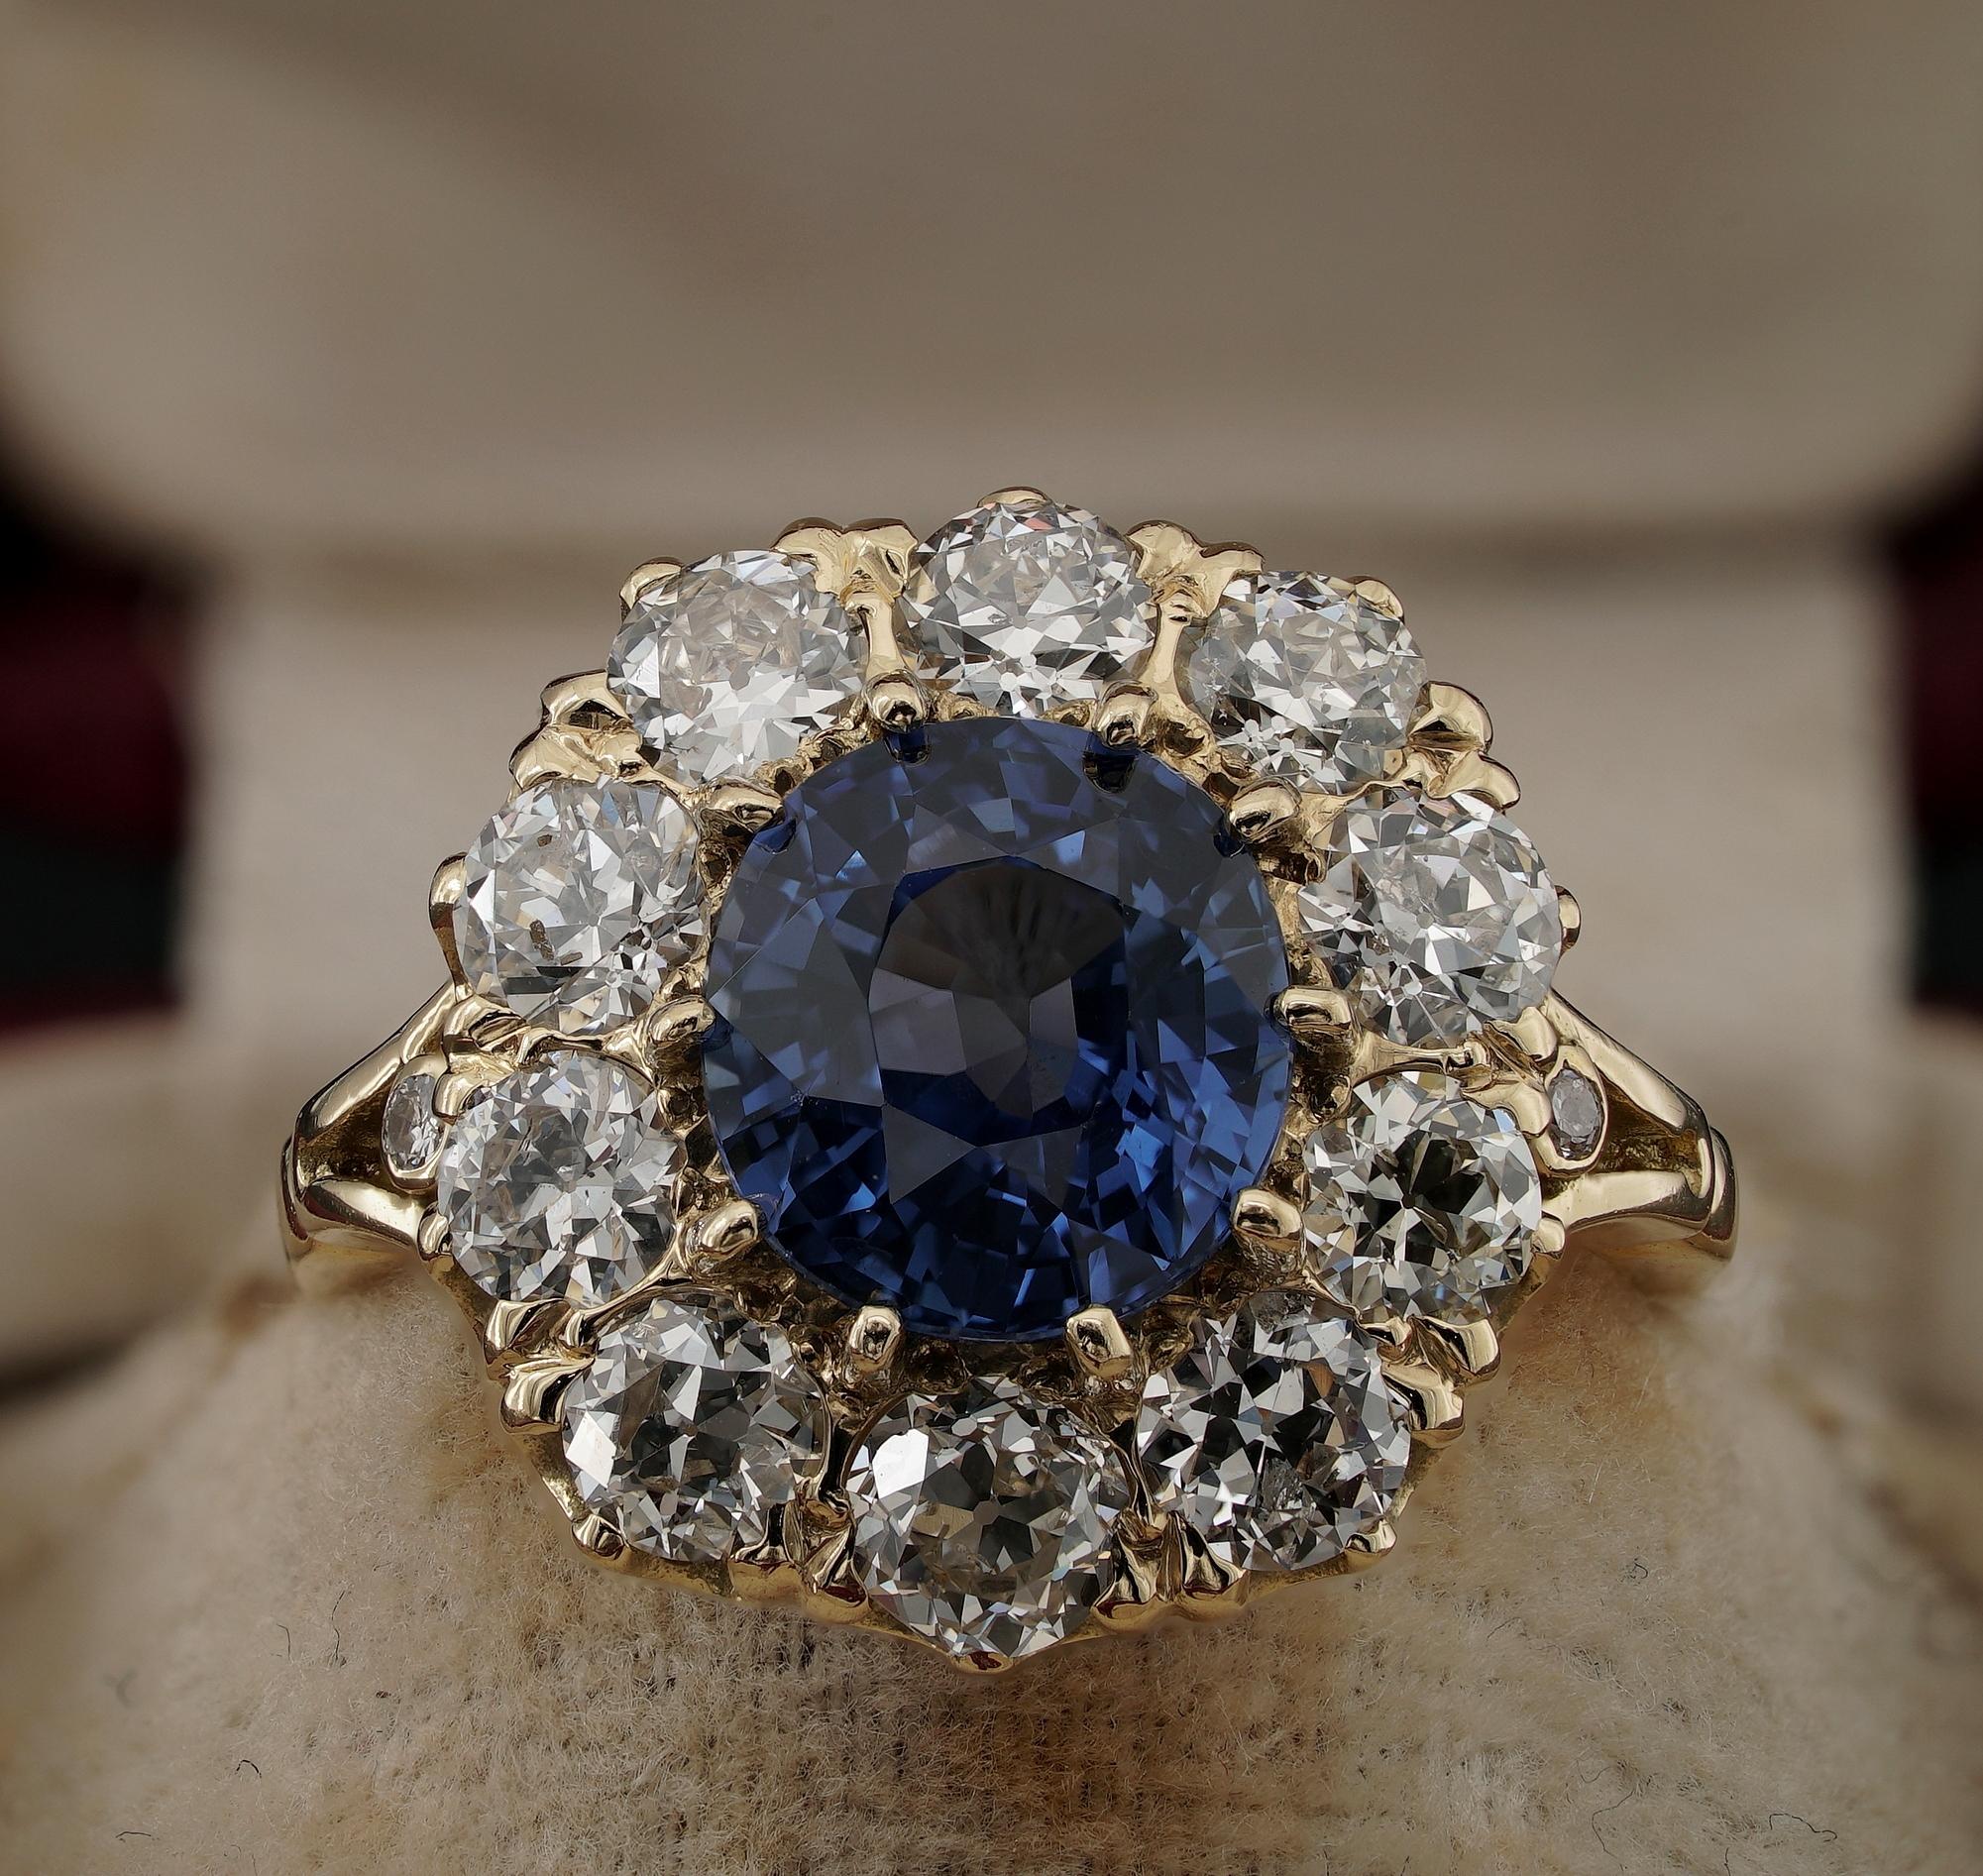 Victorian Tradition
Spectacular Victorian period Diamond and Sapphire cluster ring which is in the tradition of the antique jewellery, 1890/1900 ca
Hand crafted of solid 18 Kt gold in the classy cluster design in vogue at the time, lovely